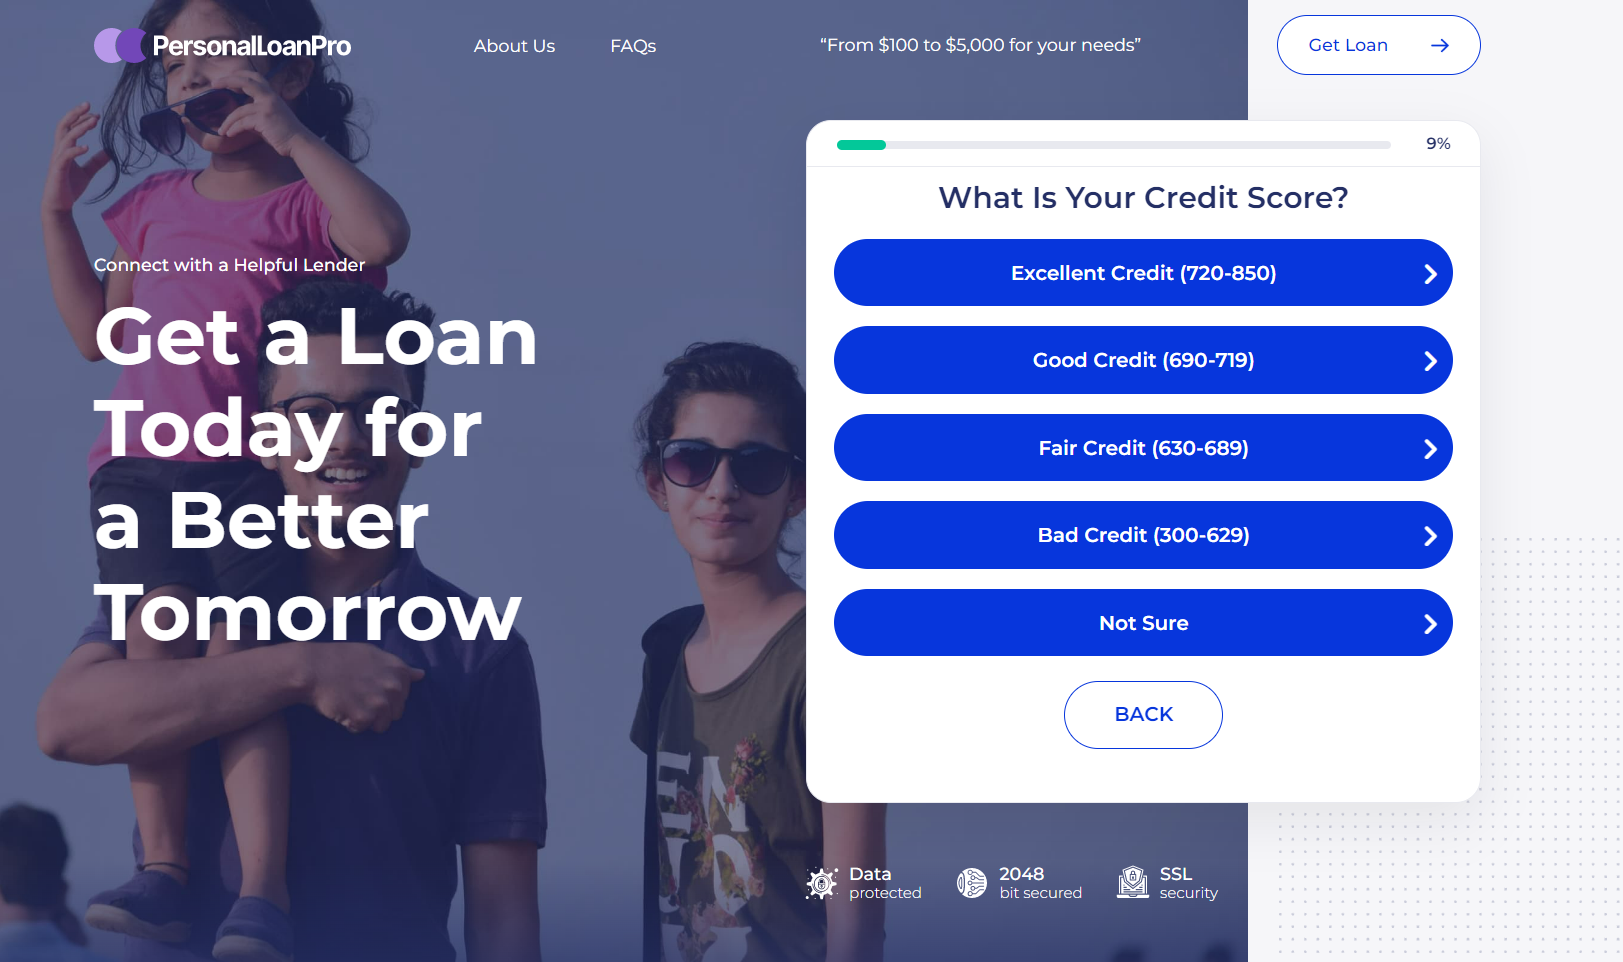 Personal Loan Pro Review - The First-Rate Personal Loan Platform
